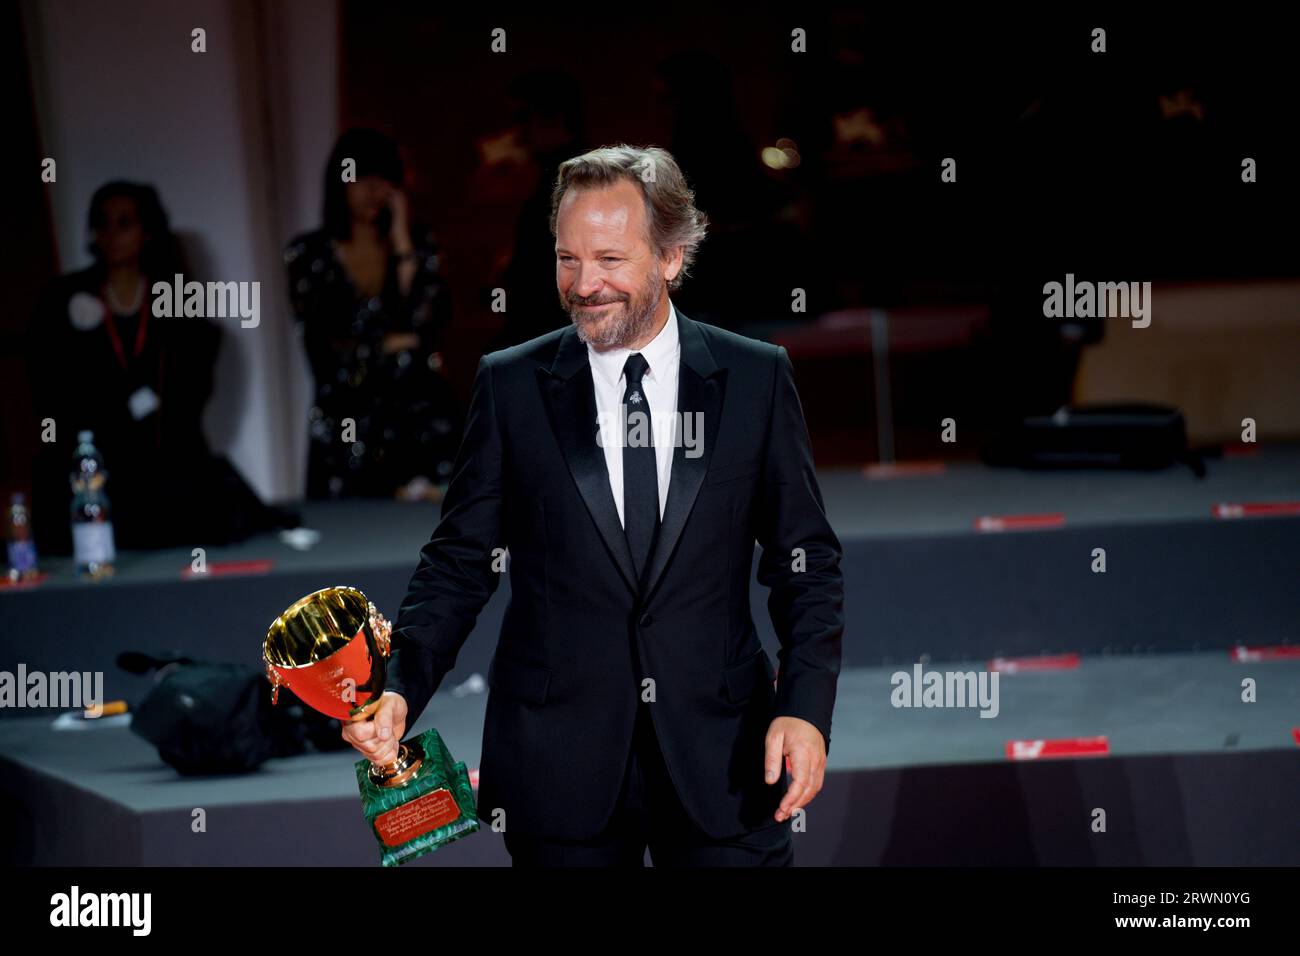 VENICE, ITALY - SEPTEMBER 09: Peter Sarsgaard poses with the Best Actor Award for 'Memory' at the winner's photocall at the 80th Venice International Stock Photo